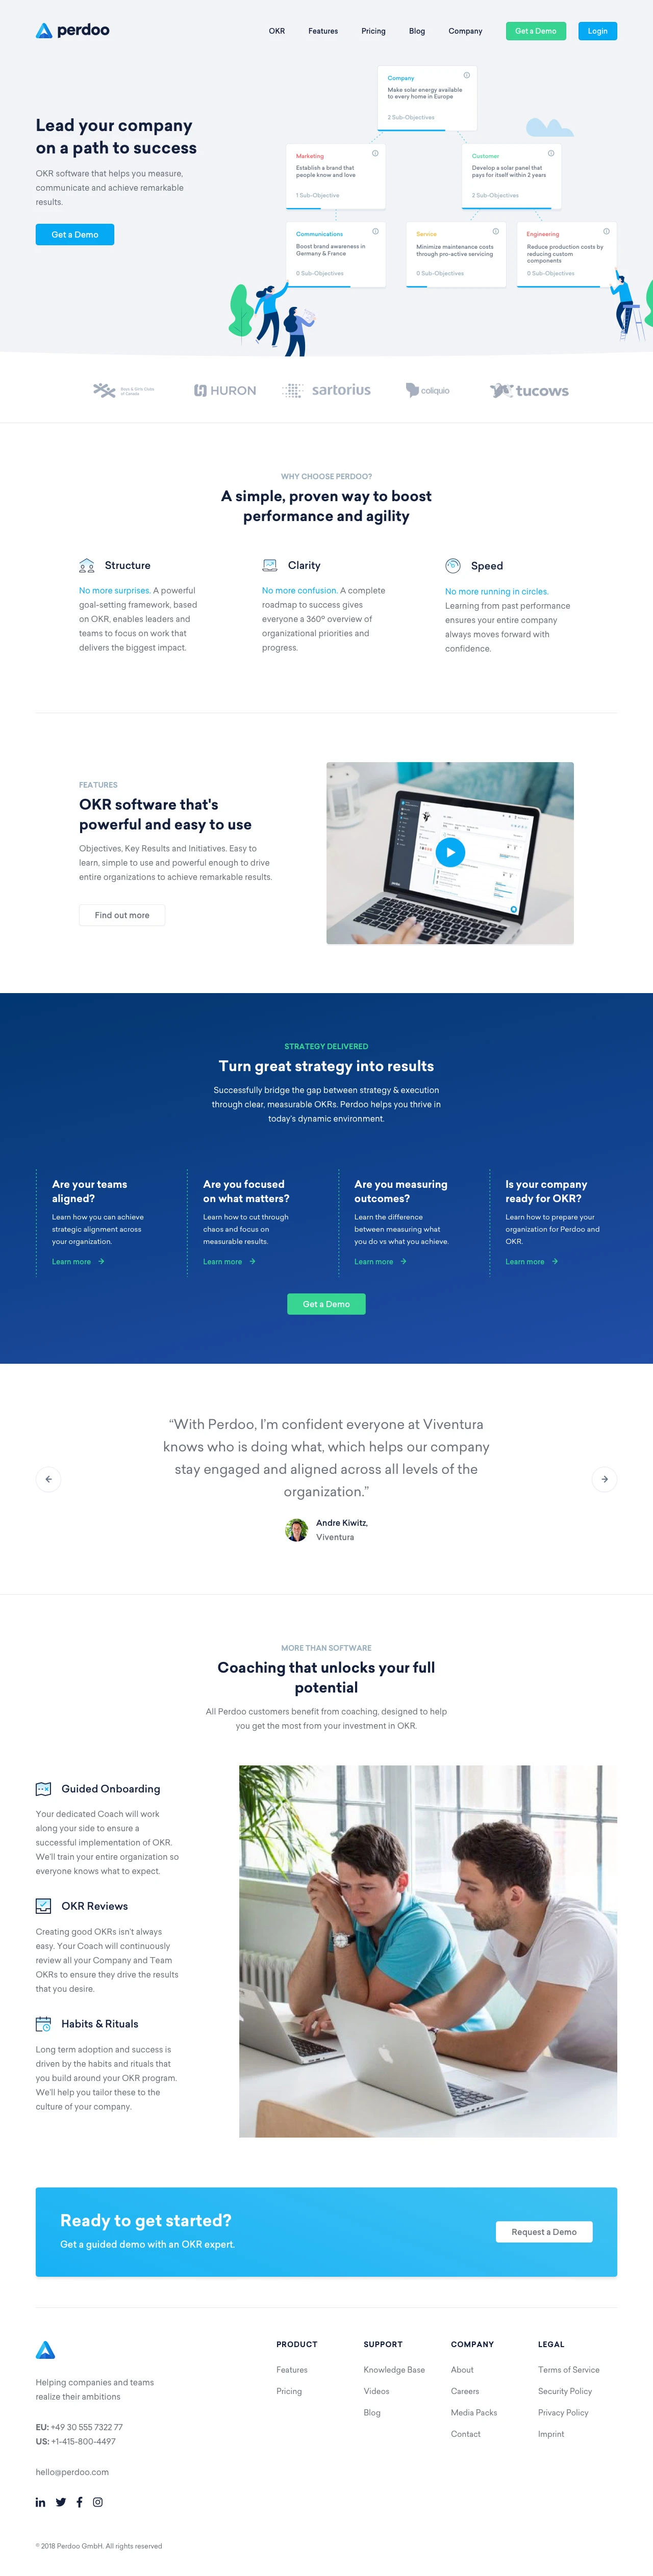 Perdoo Landing Page Example: OKR software for leaders and teams. OKR software that helps you measure, communicate and achieve remarkable results.